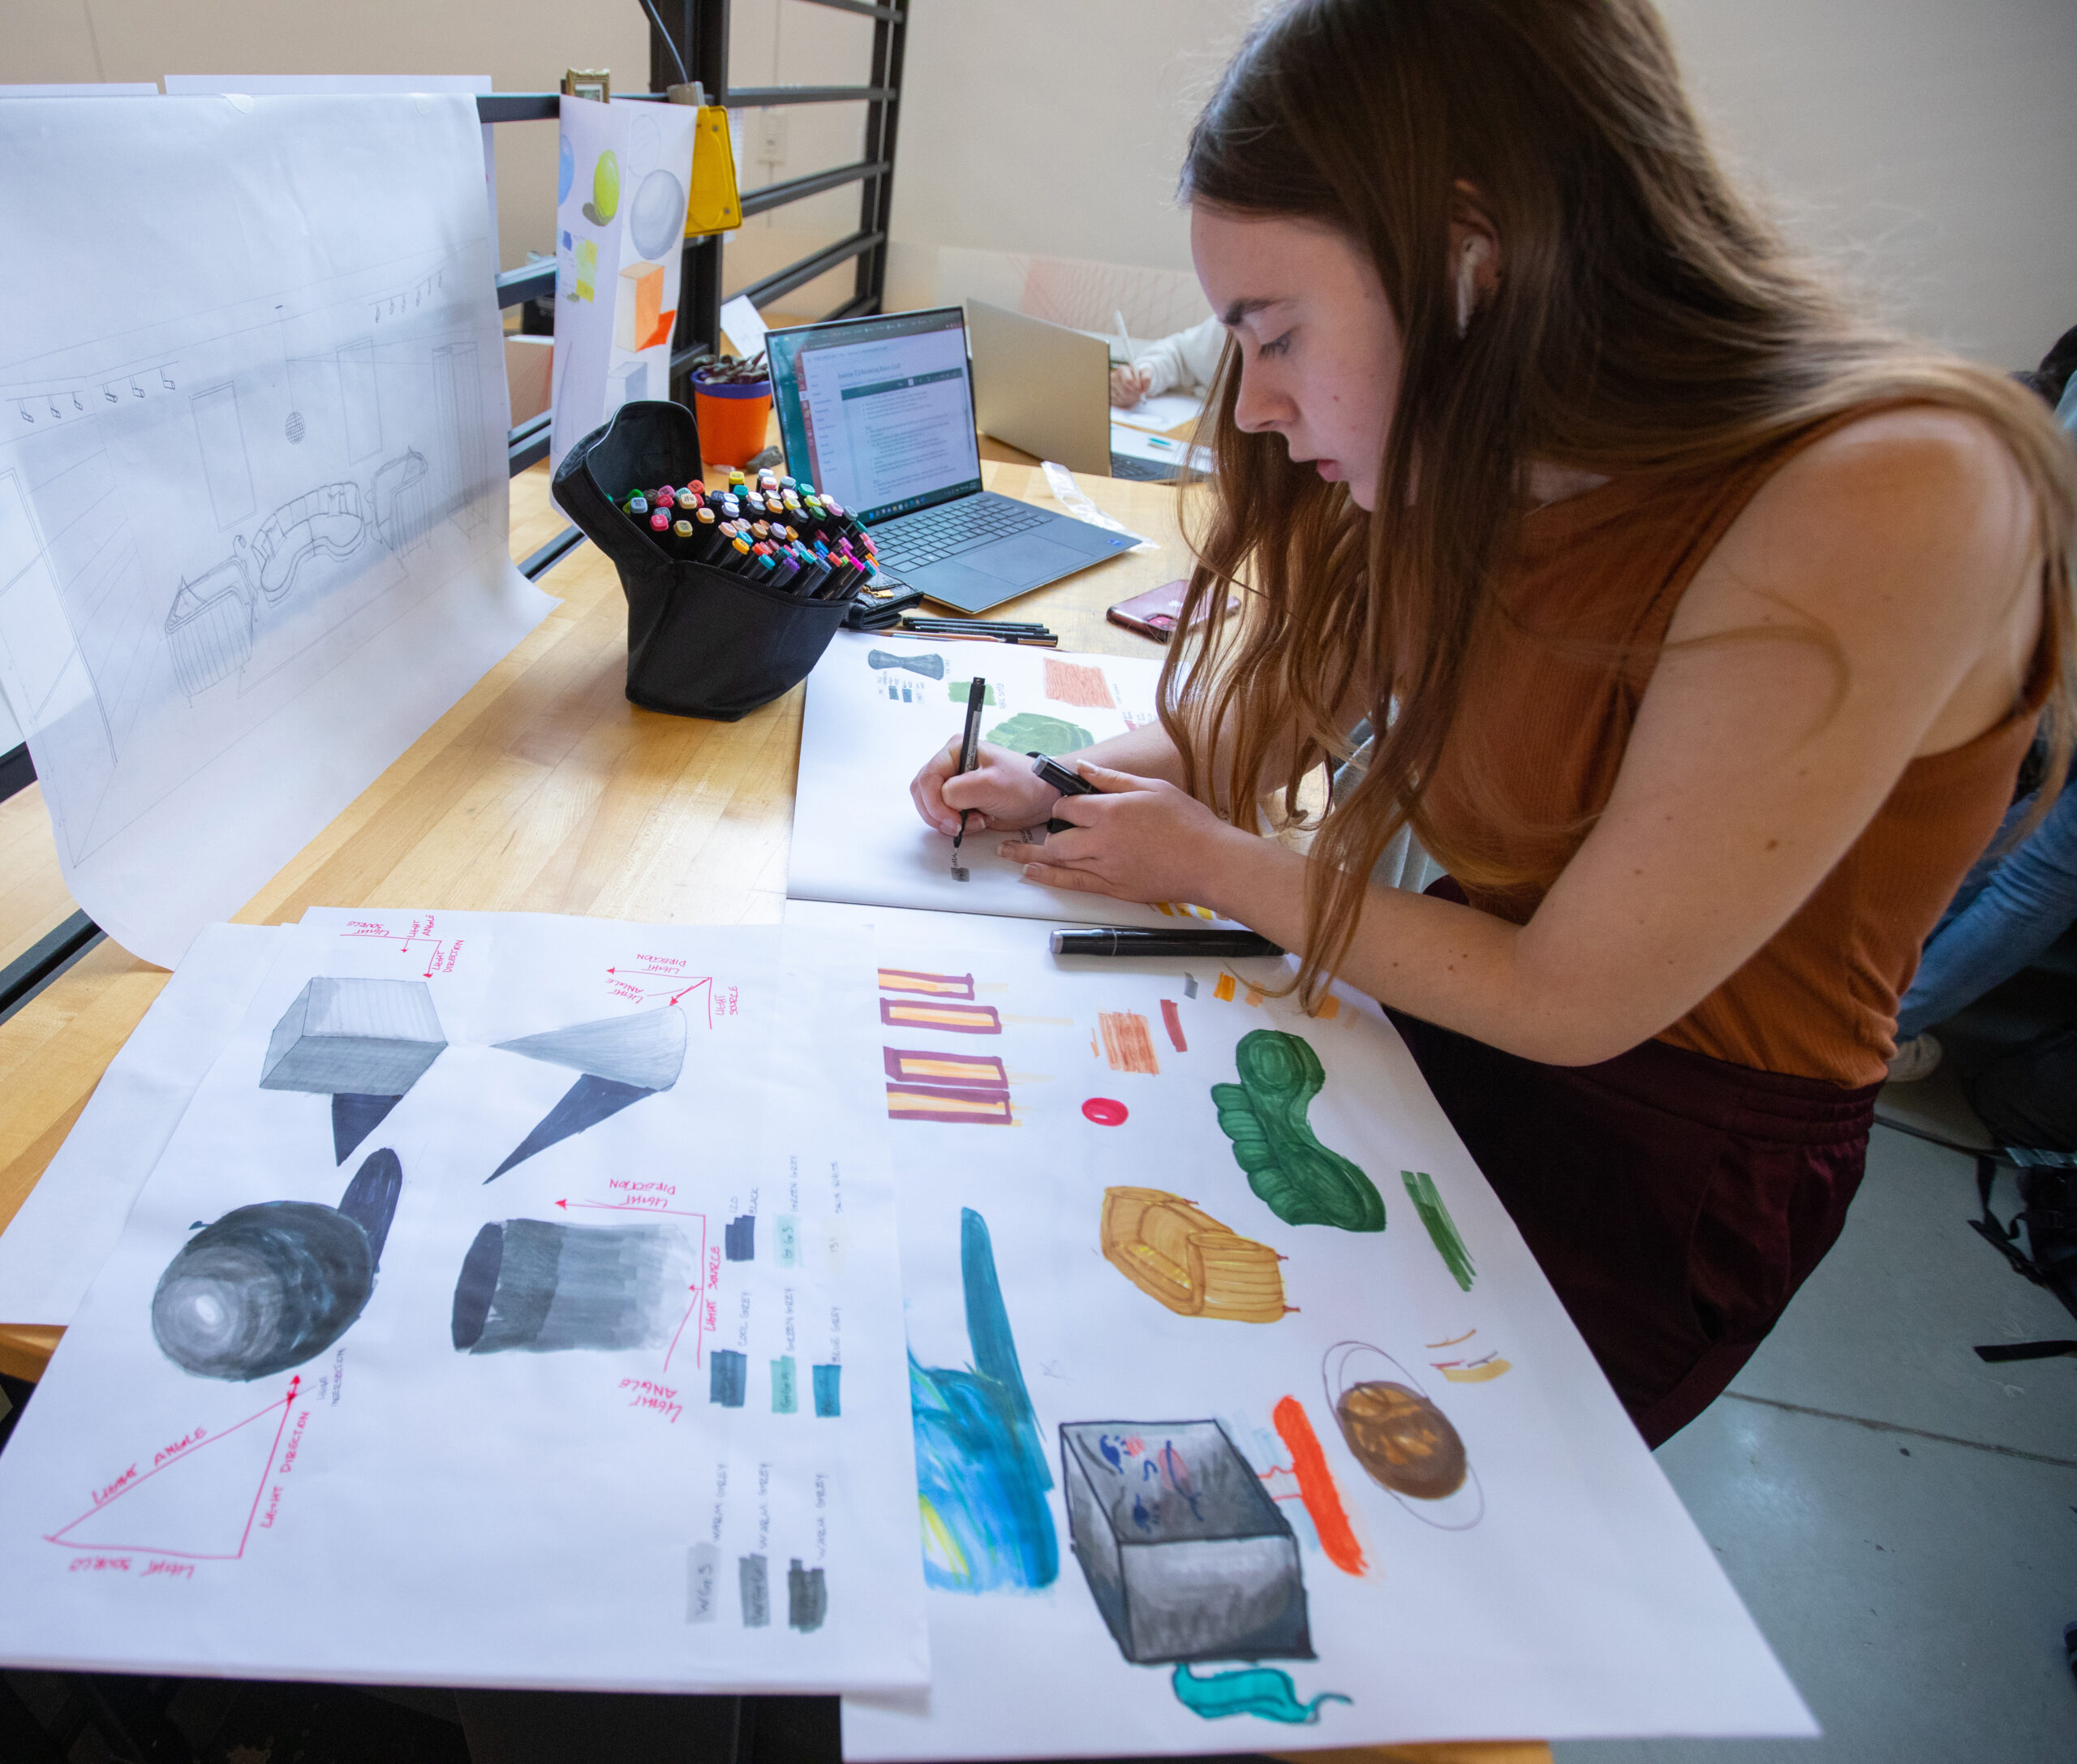 Female student working on graphic design drawing